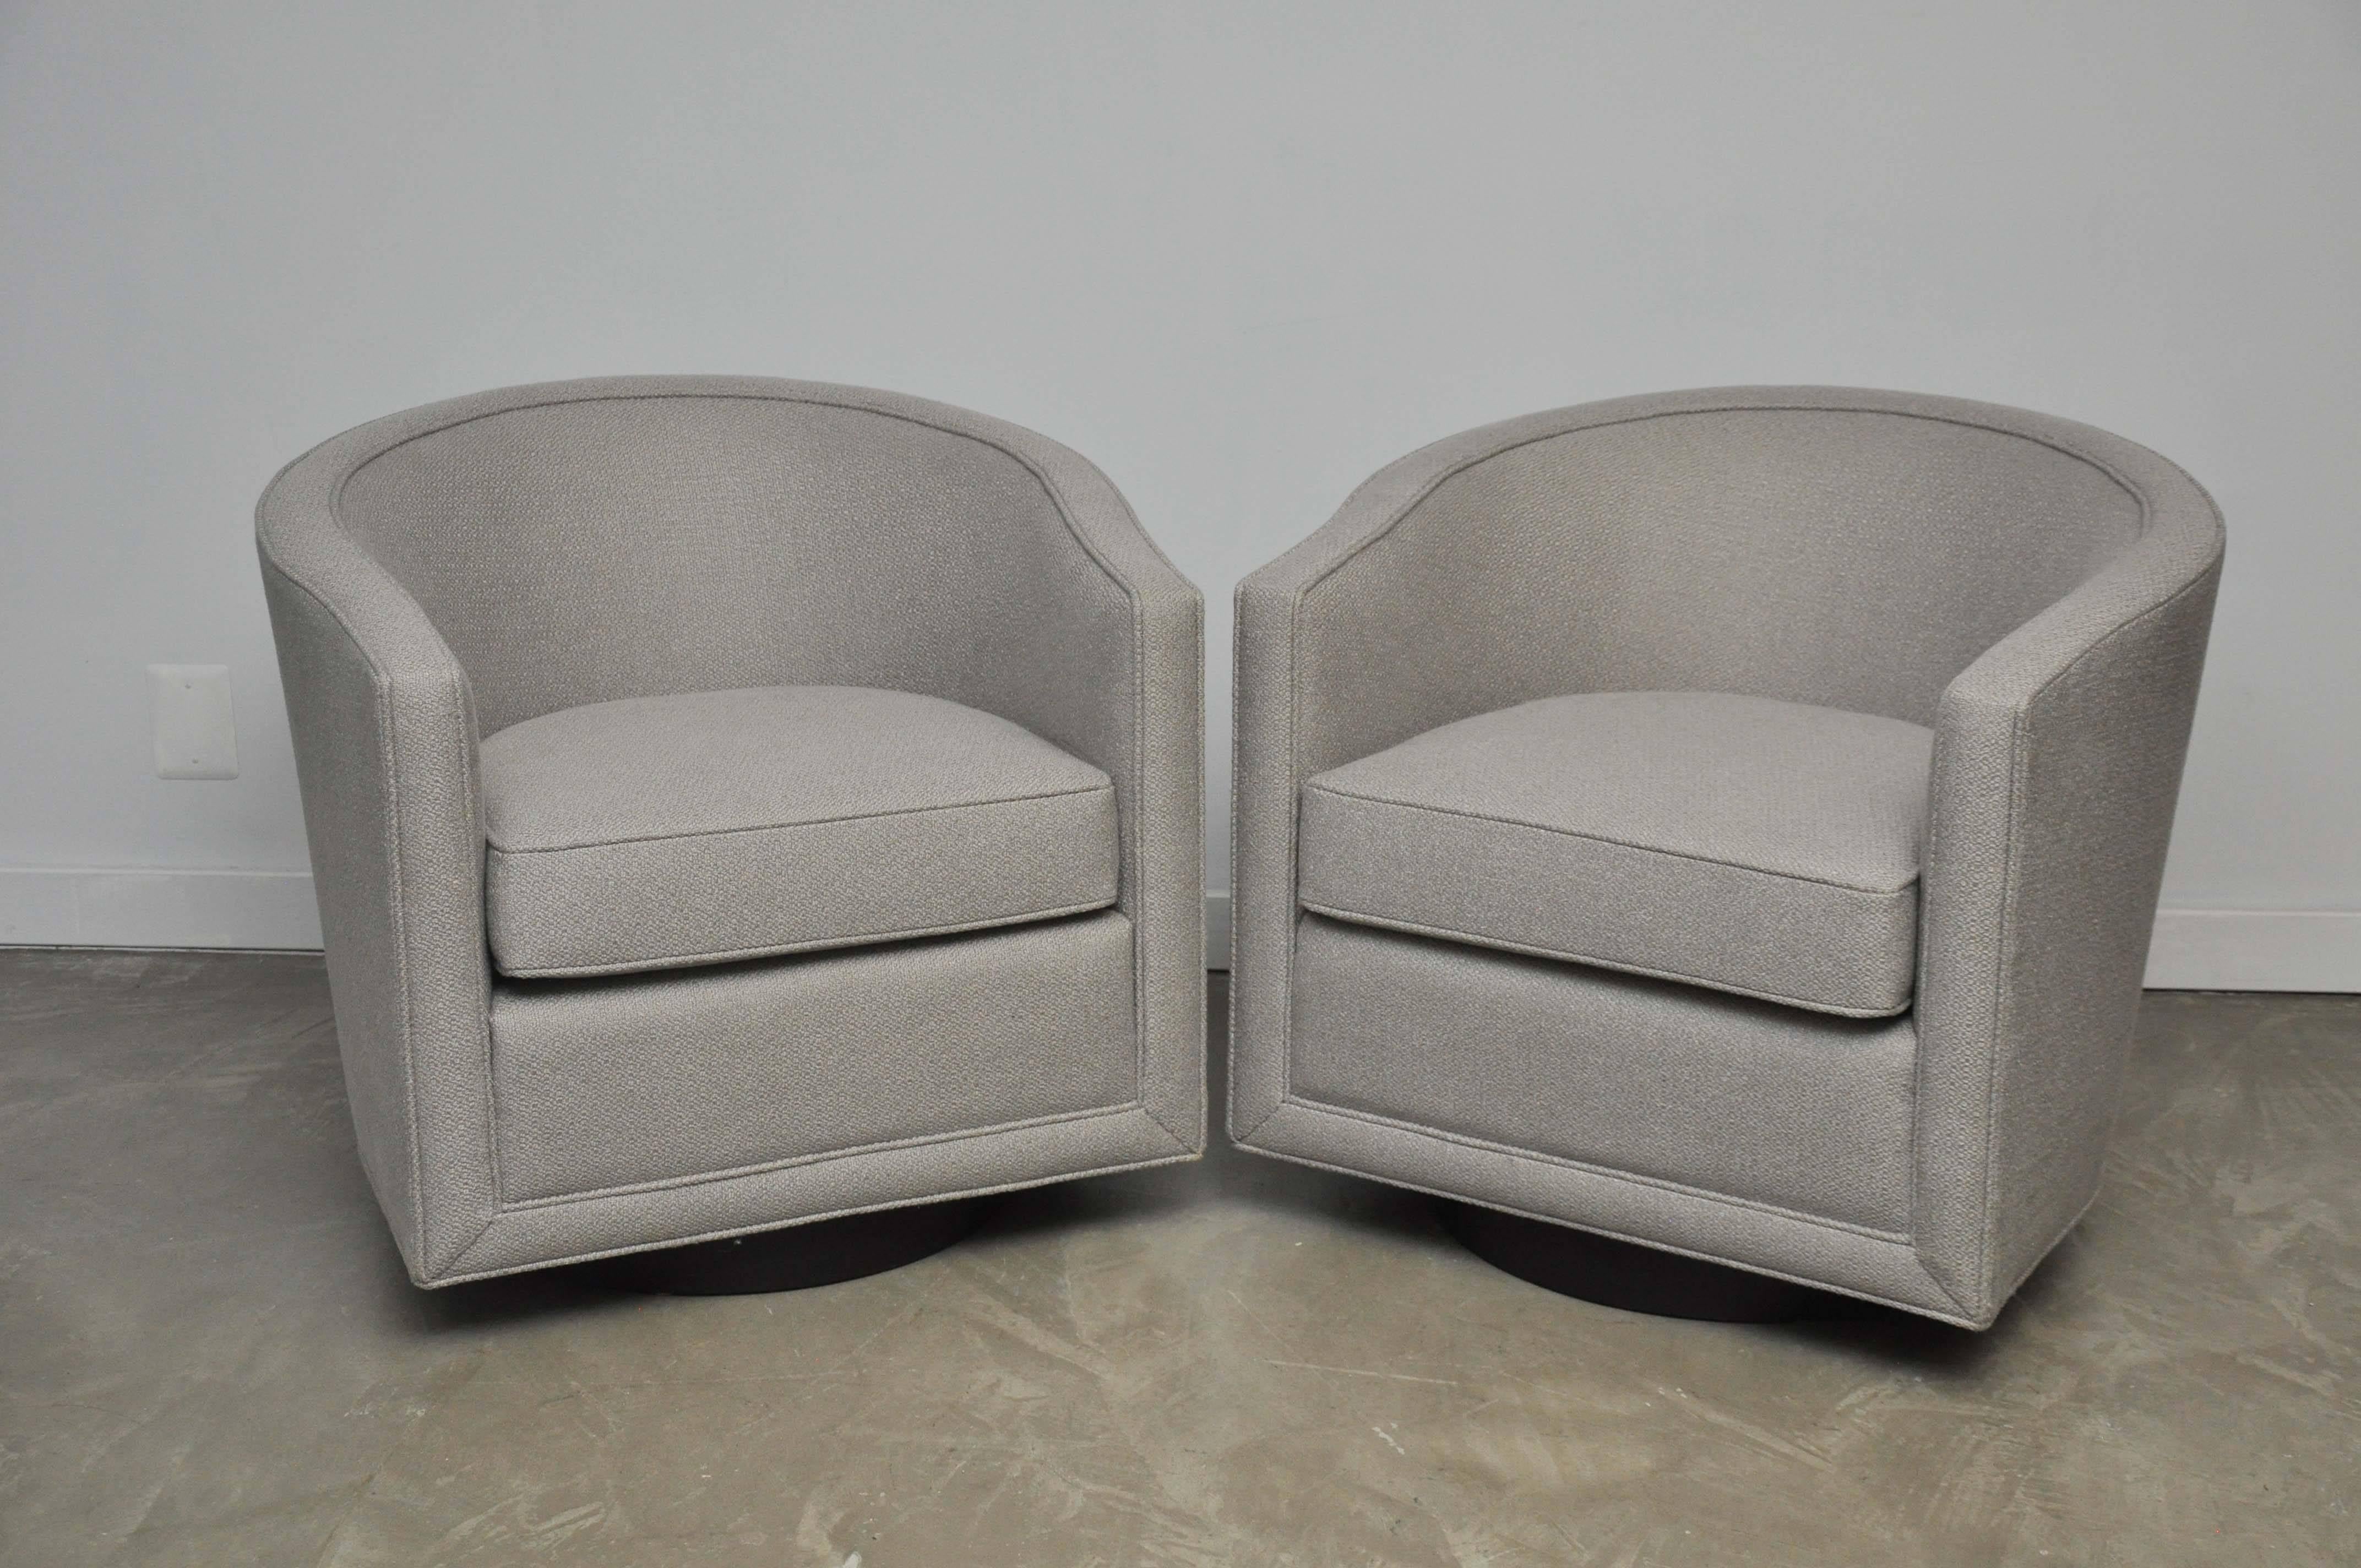 Classic pair of swivel lounge chairs by Roger Sprunger for Dunbar. Fully restored. Newly upholstered.